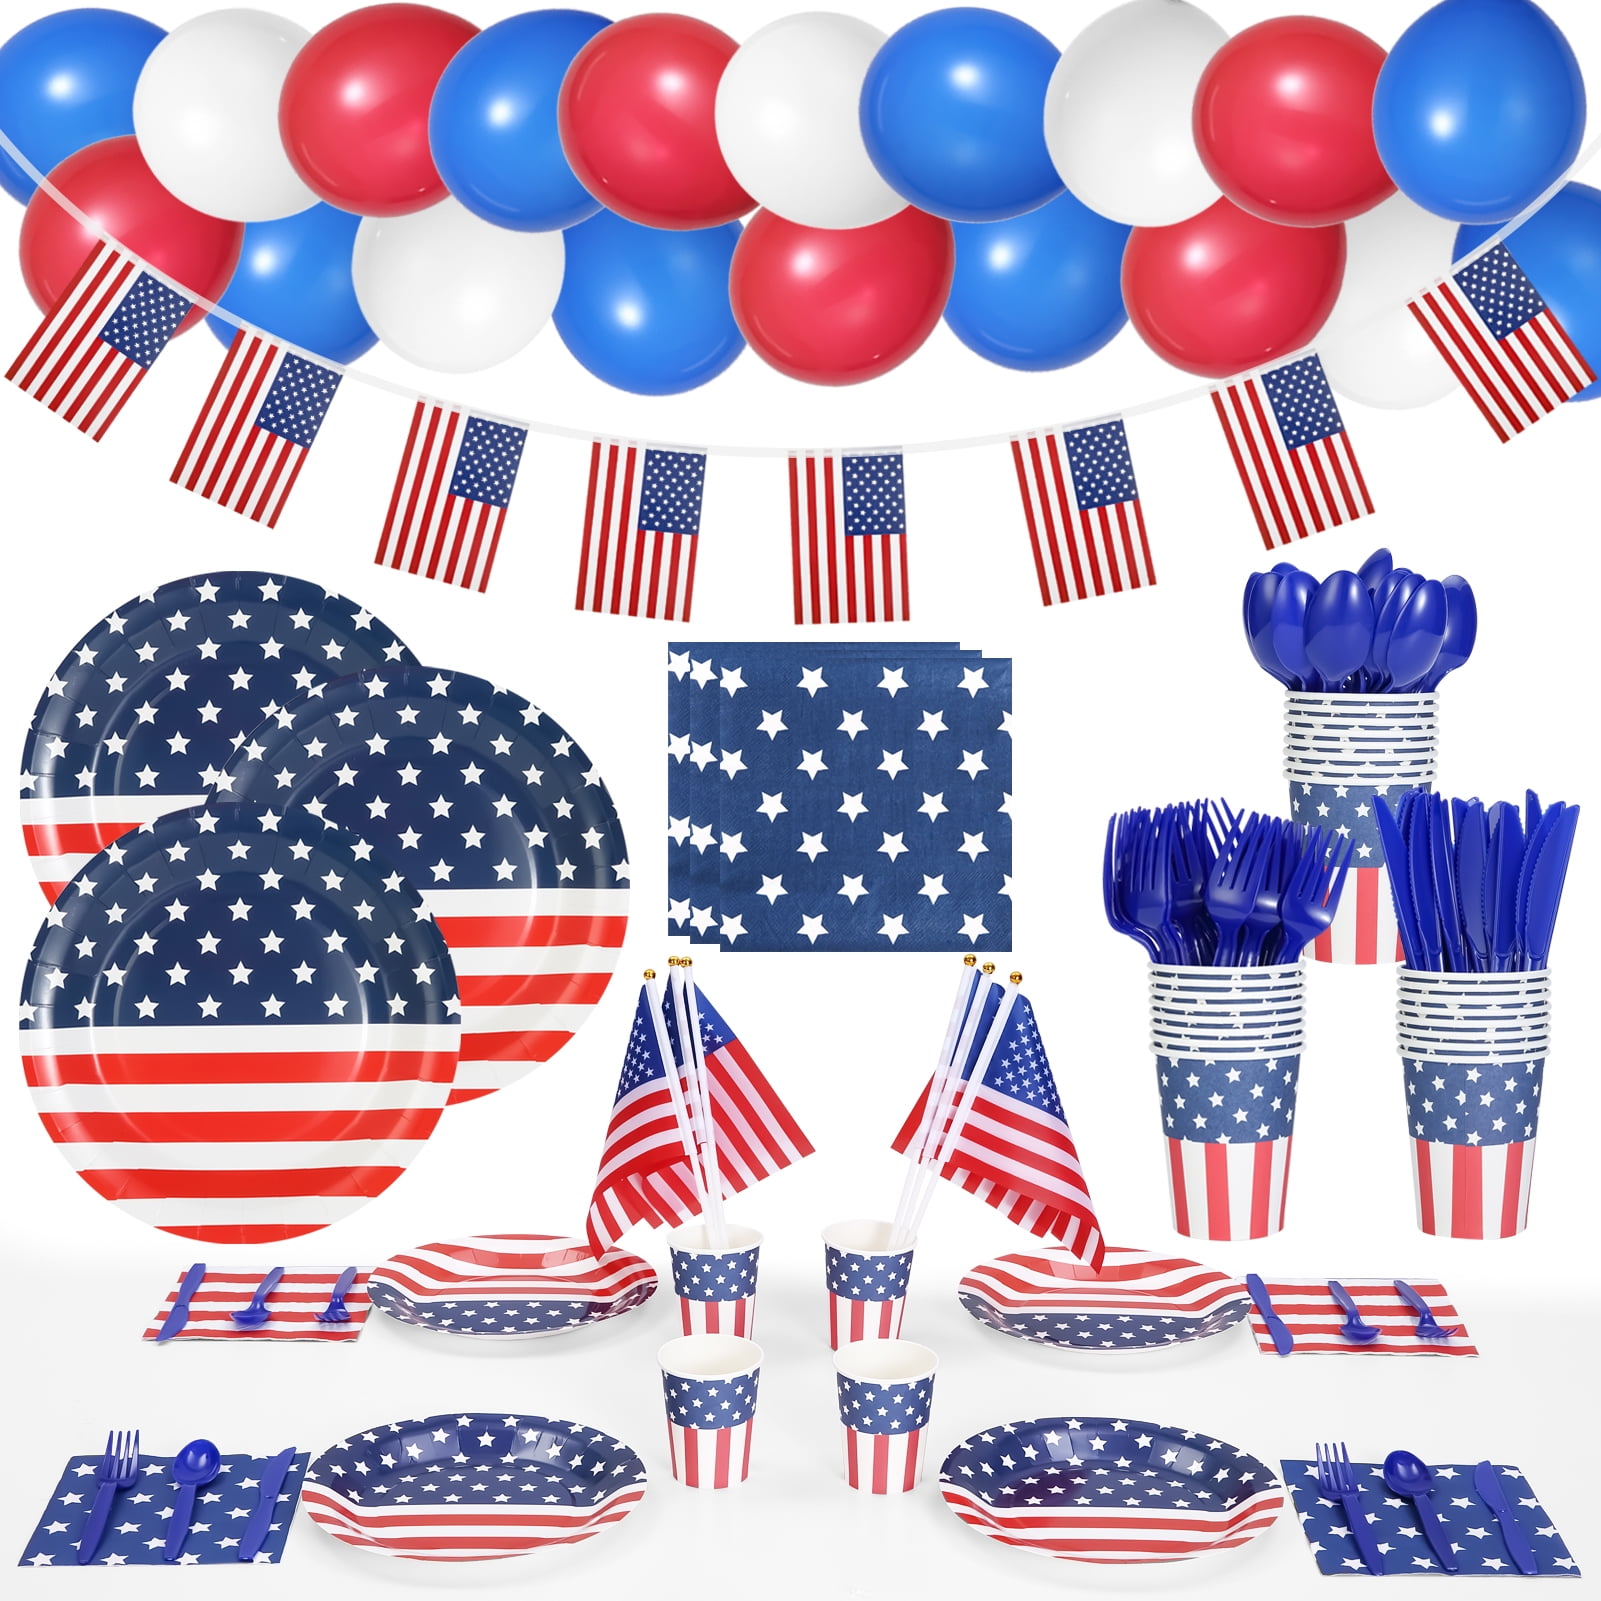 1 Dozen Woven Polyplastic Patriotic Potato Sacks 4th of July Independance Day for sale online 